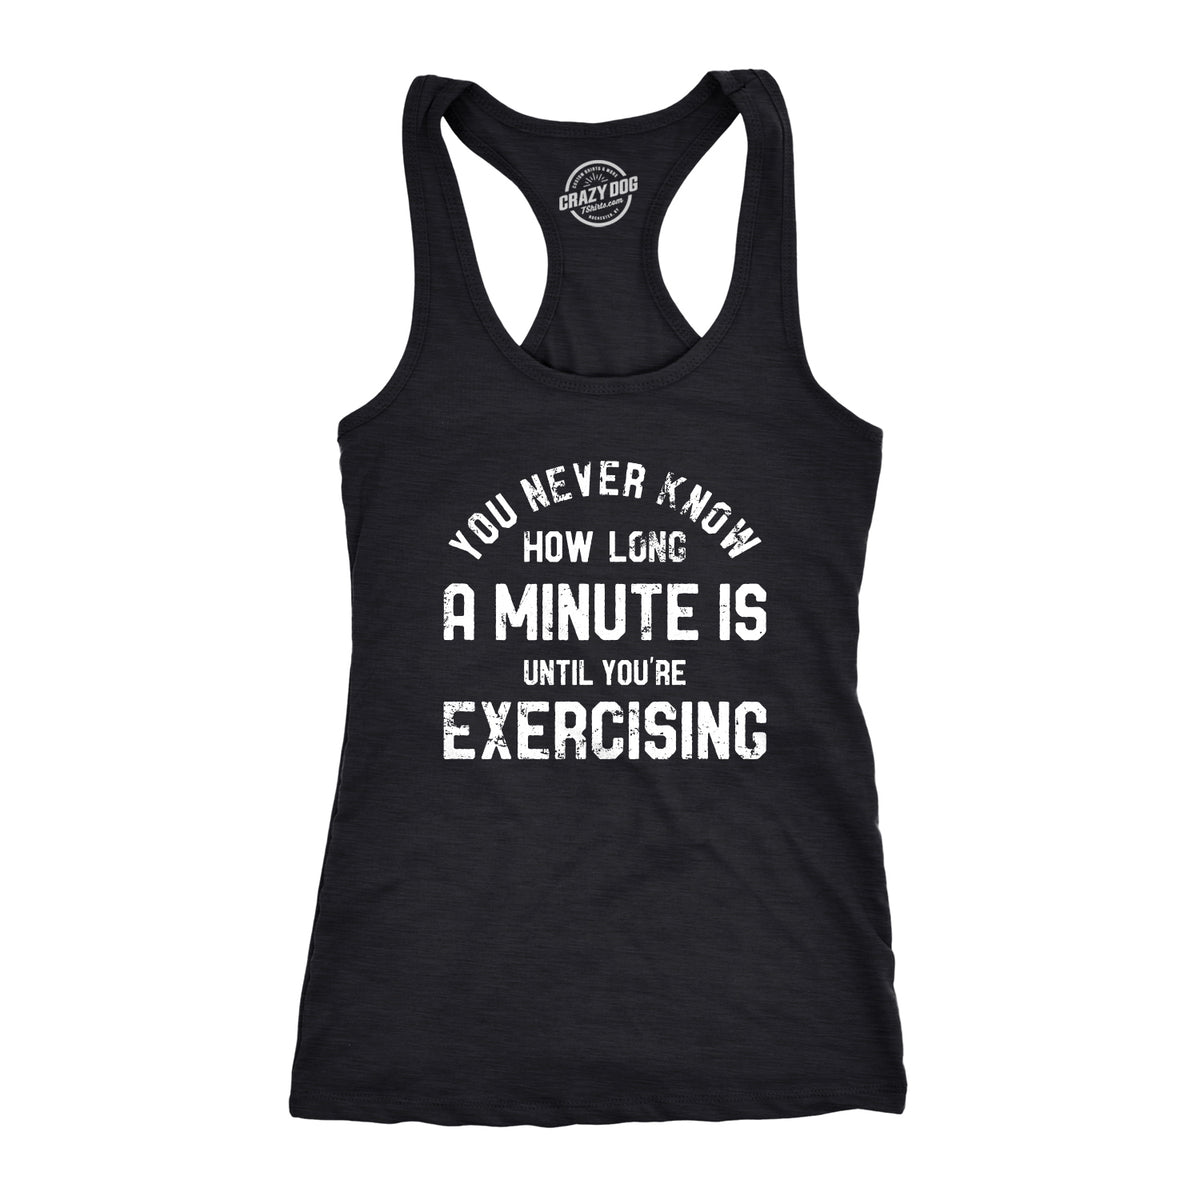 Funny Heather Black - EXERCISING You Never Know How Long A Minute Is Until Youre Exercising Womens Tank Top Nerdy Fitness Sarcastic Tee